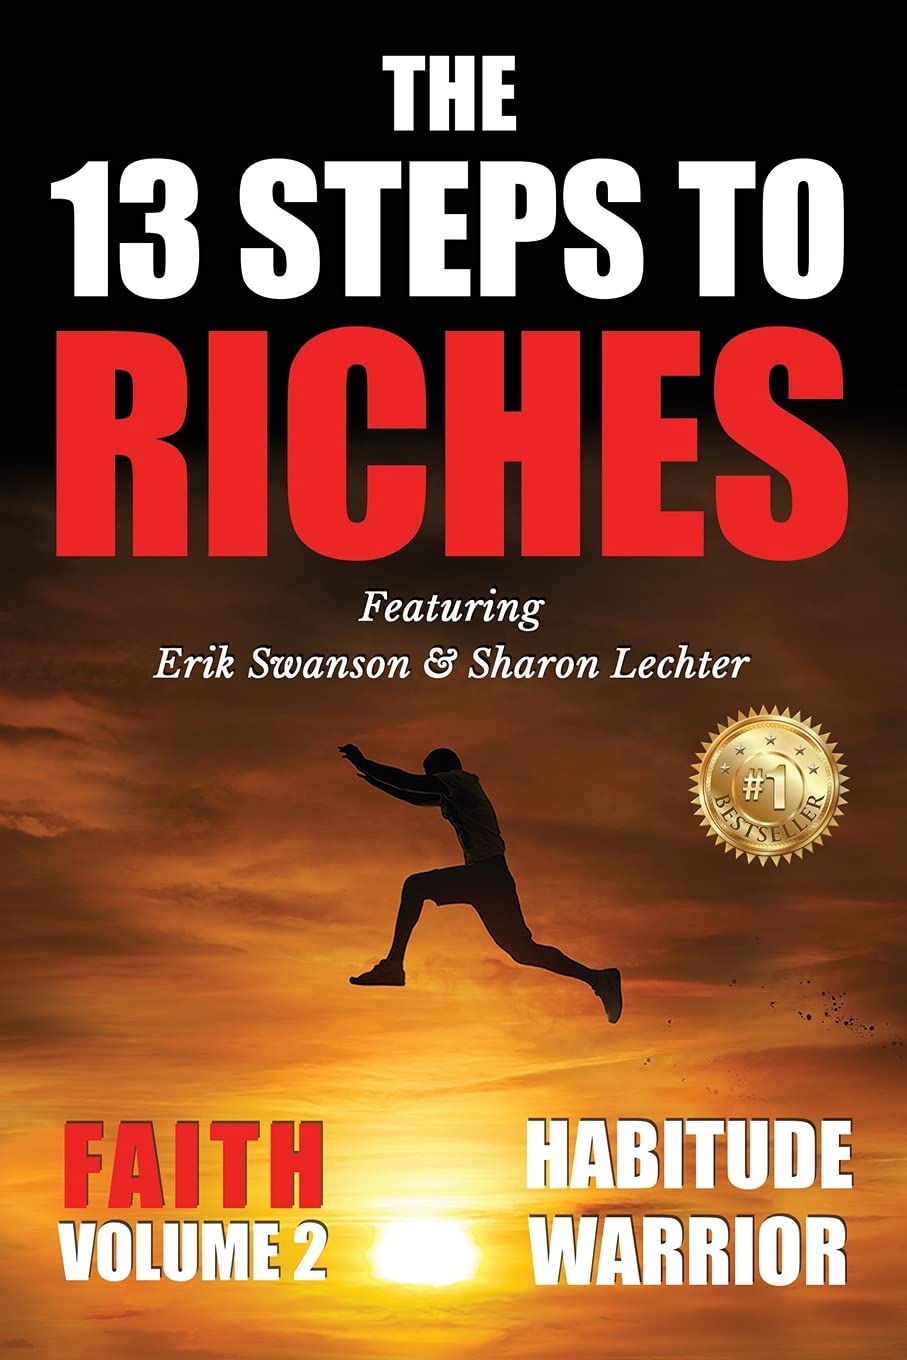 A picture of the second volume in the series, "13 Steps to Riches".